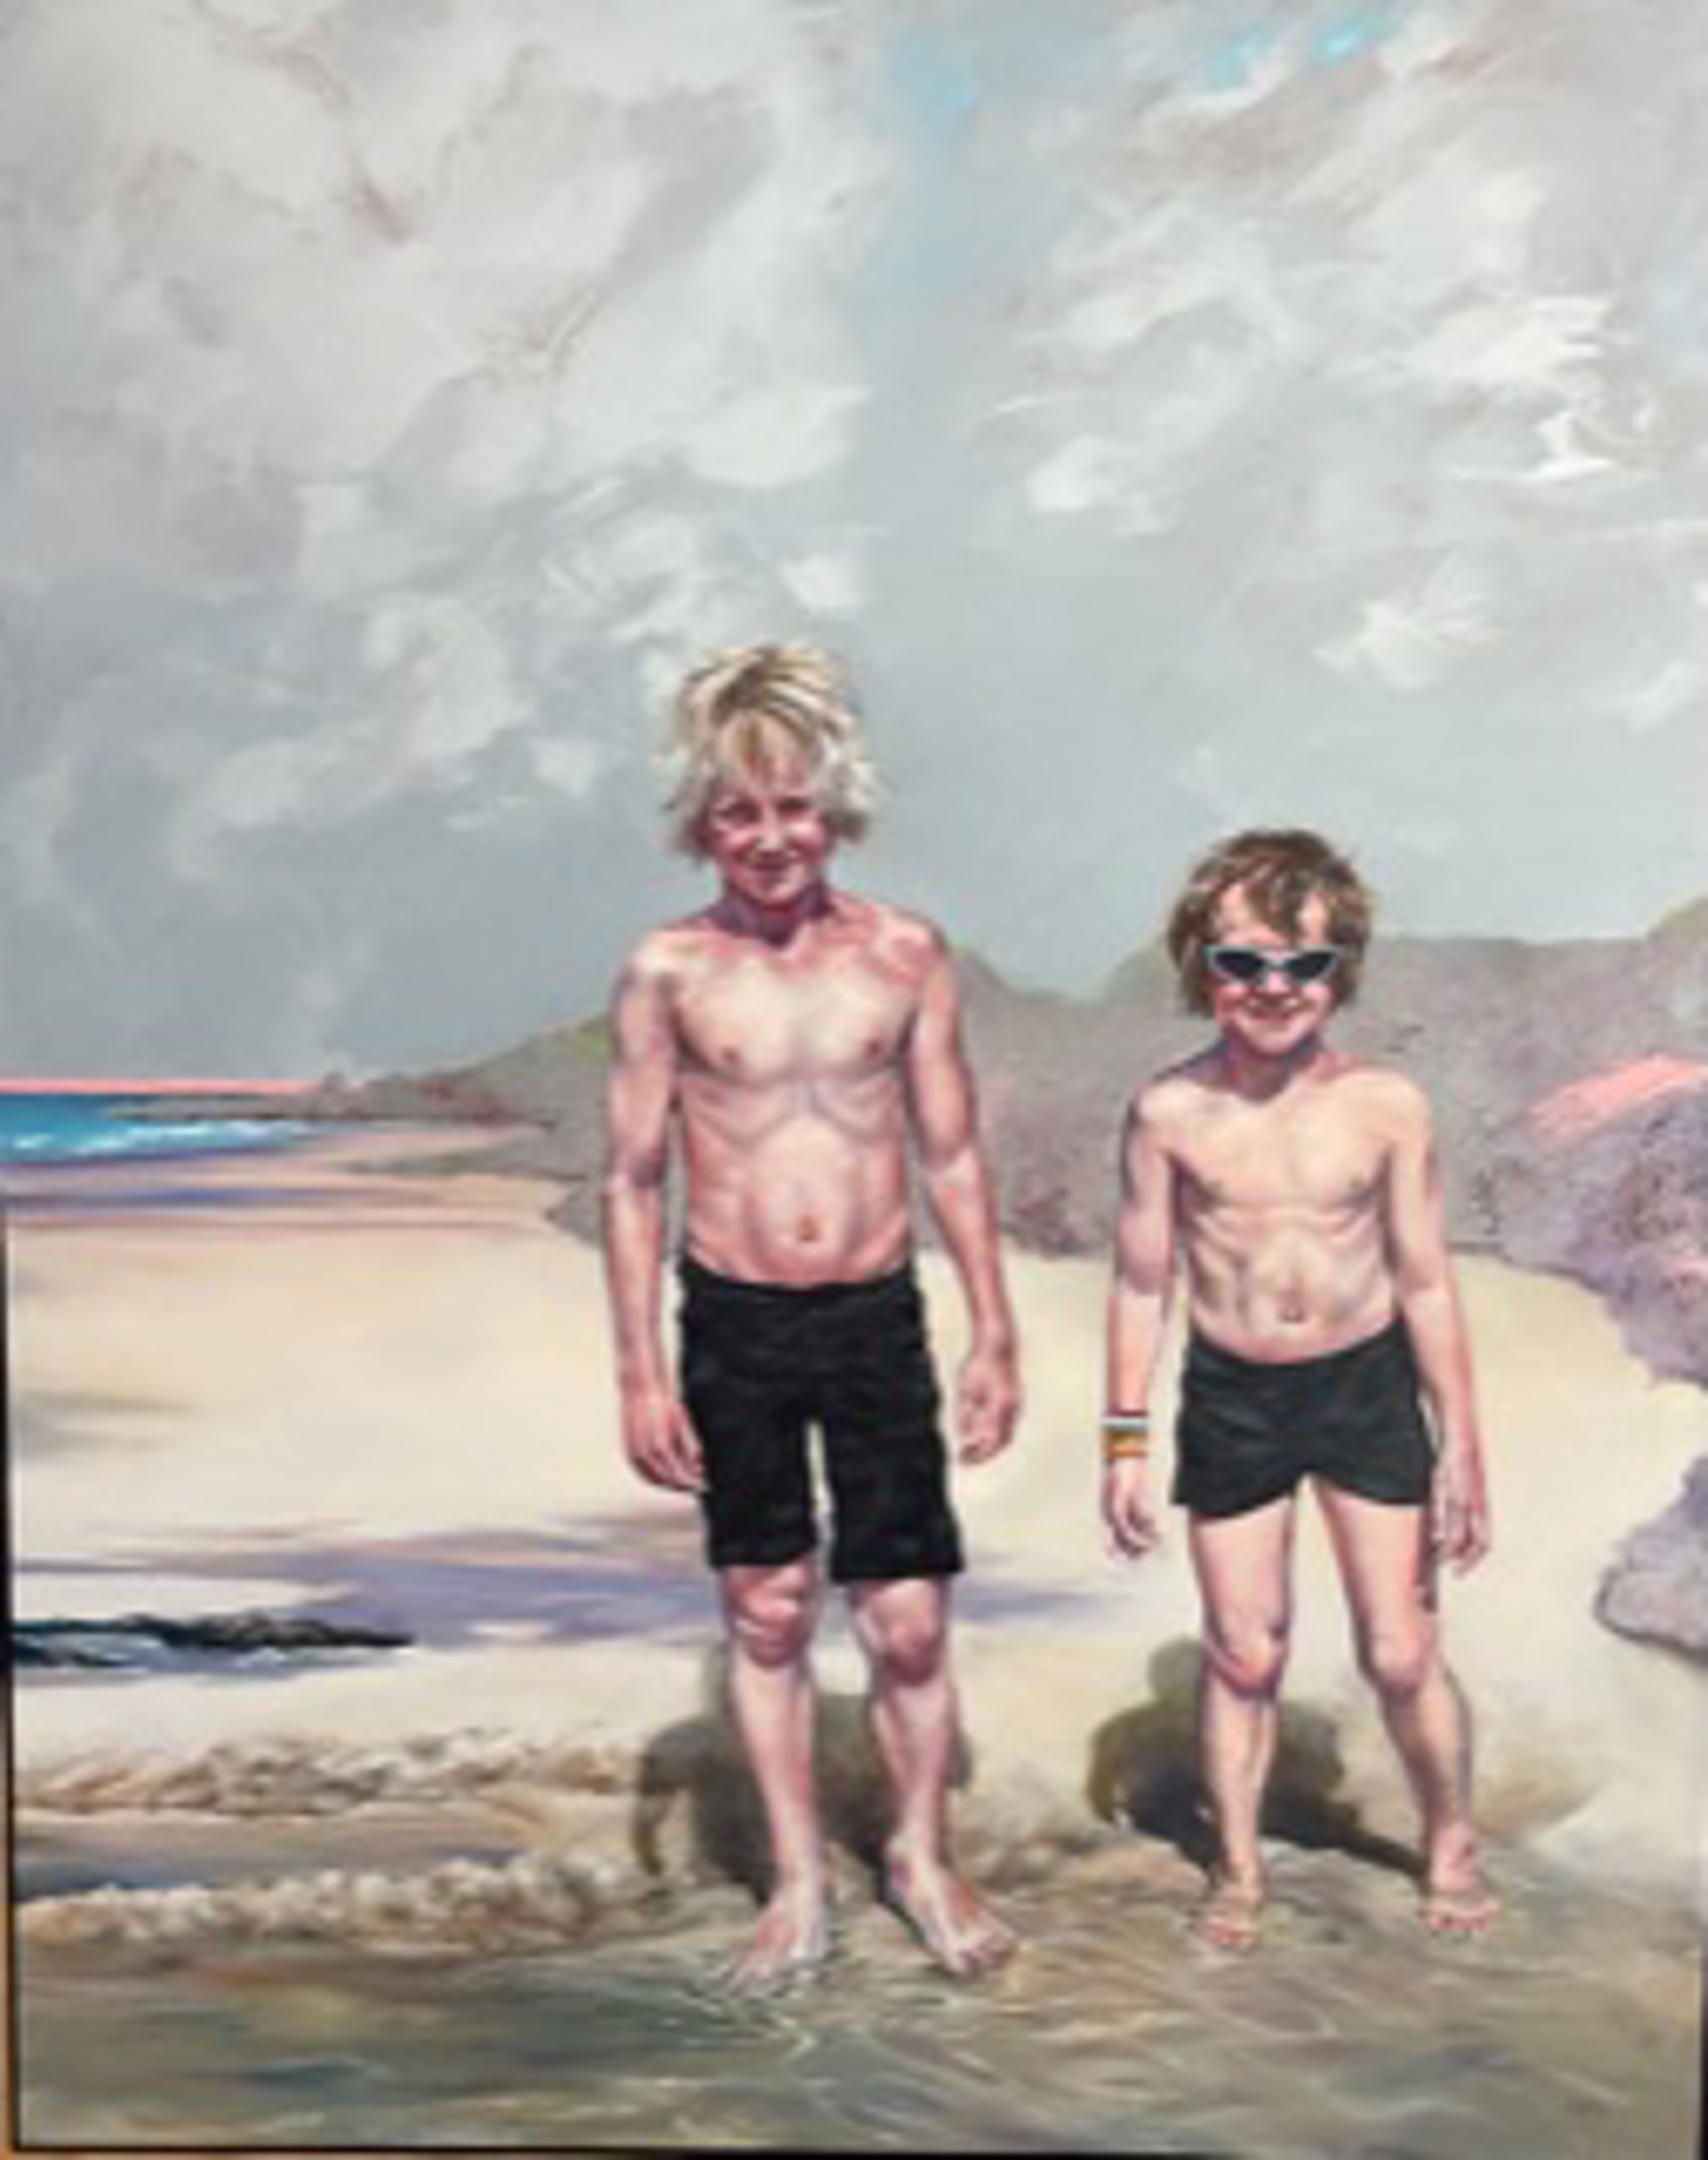 Sunscreen - Rod & Elton as Children at the Beach by Lawrence Jolly